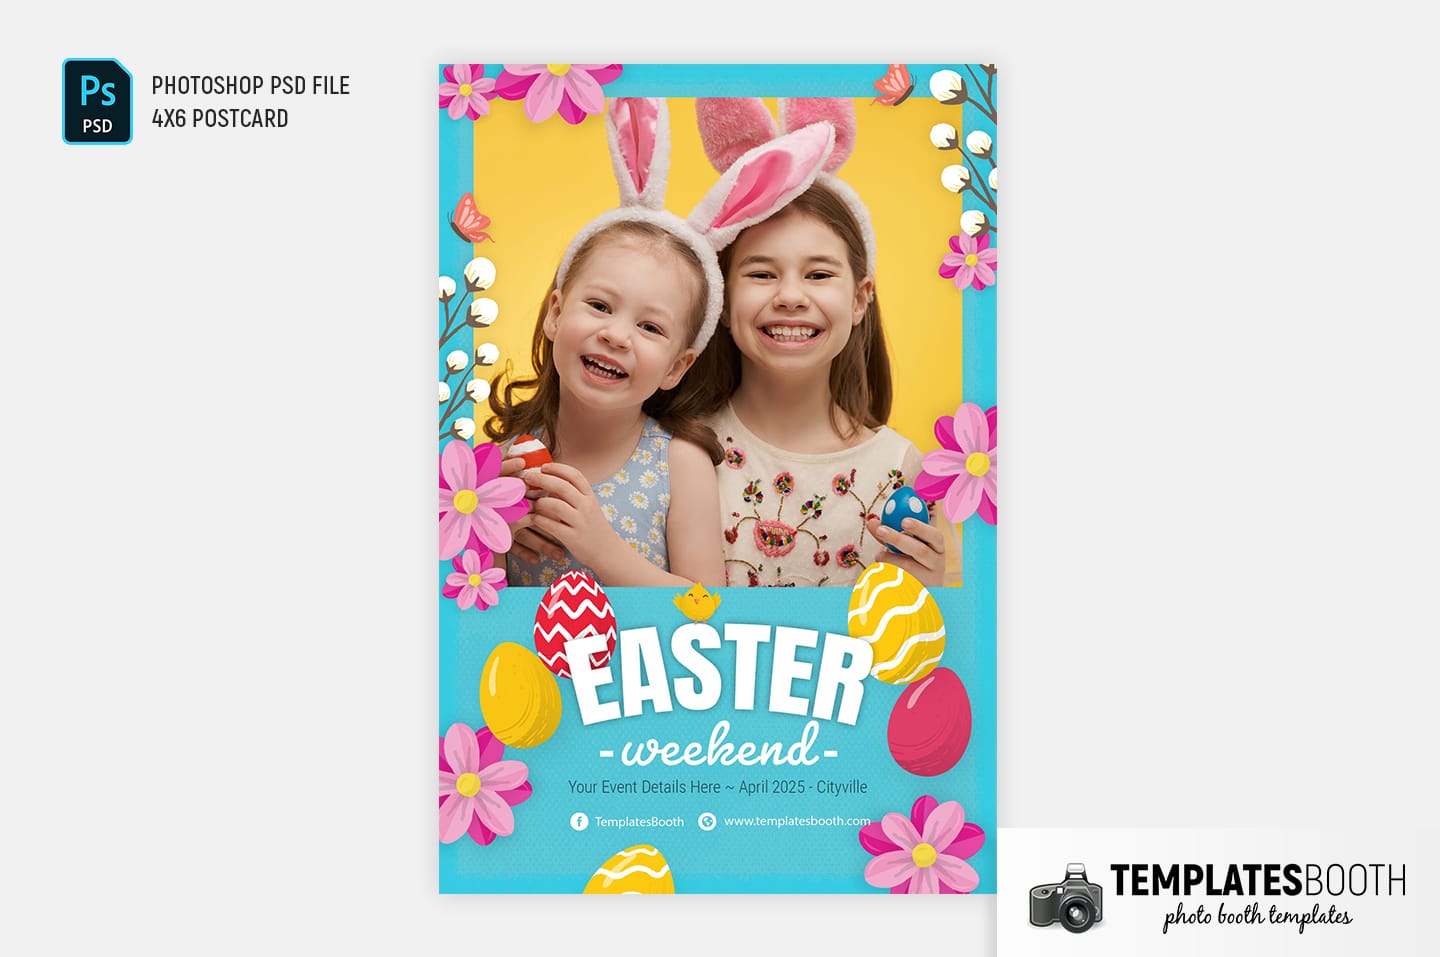 Easter Photo Booth Template (4x6 postcard)